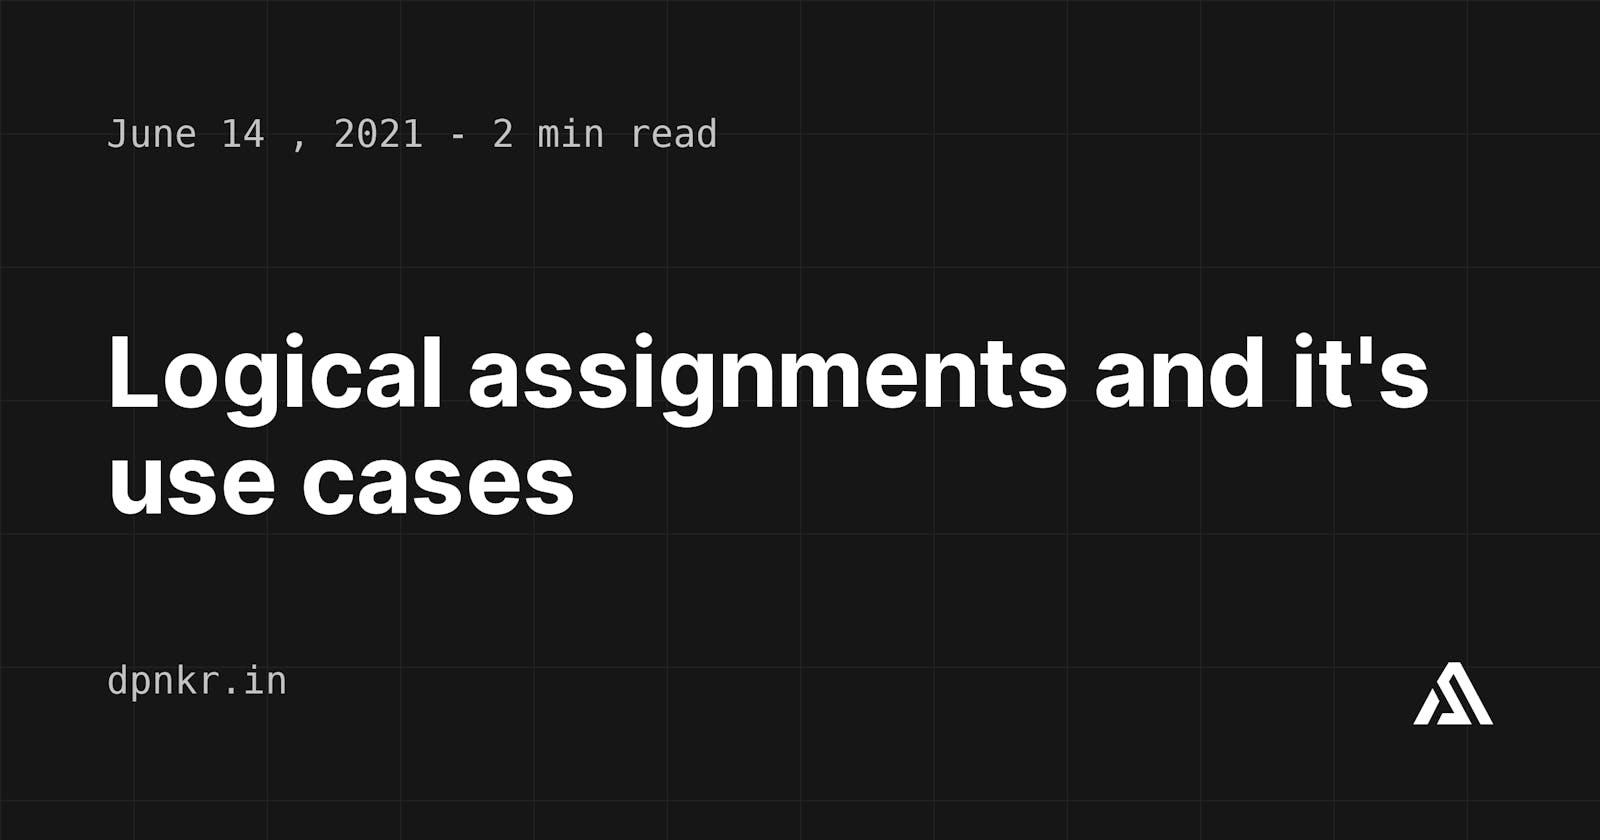 Logical assignments and their use cases